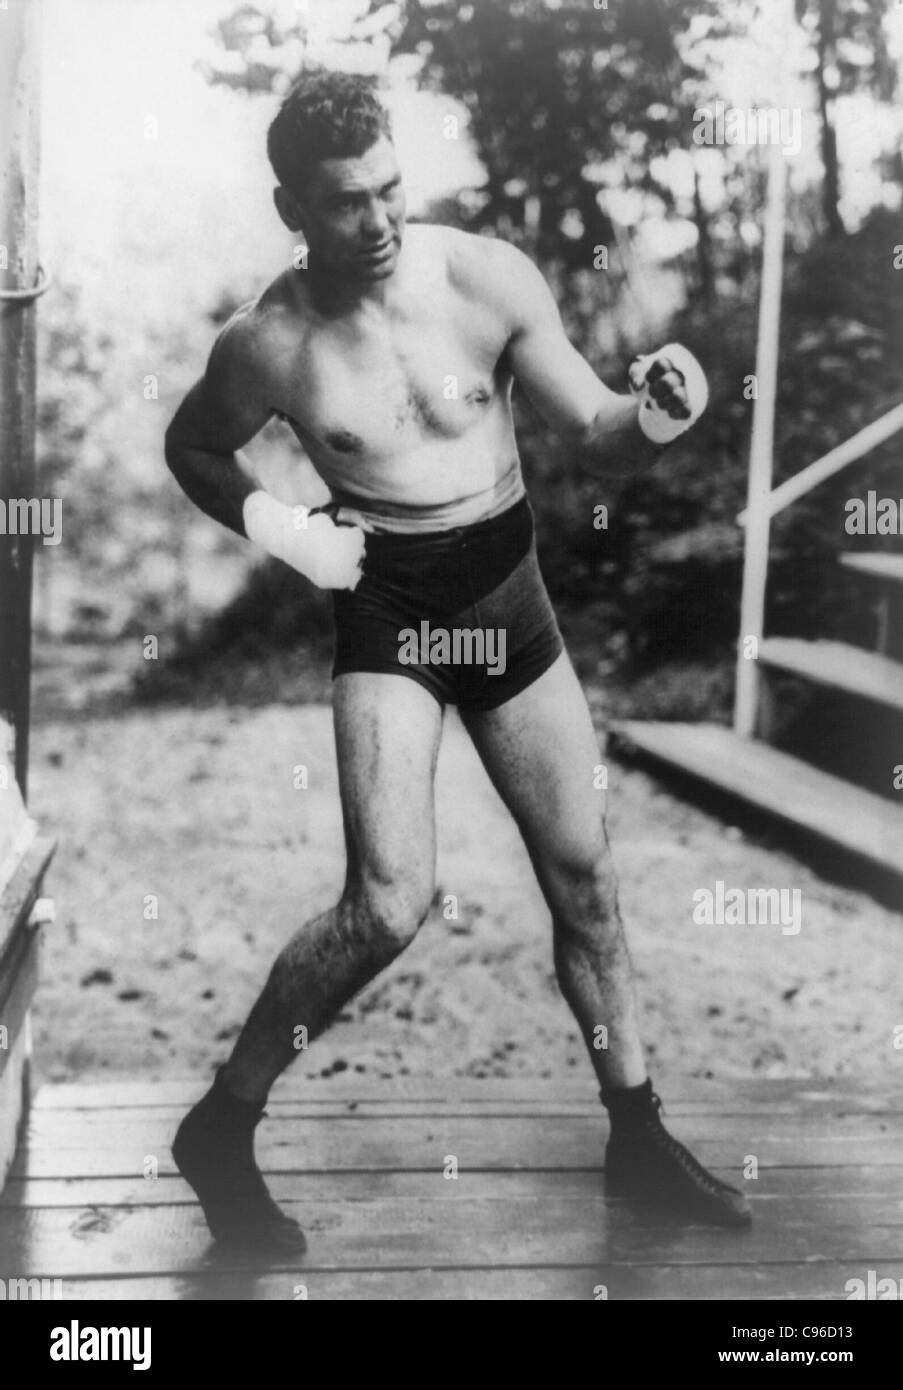 Vintage photo of boxer Jack Dempsey (1895 – 1983) – Dempsey, known as “The Manassa was World Heavyweight Champion from 1919 to 1926. Photo circa 1922 Stock Photo - Alamy